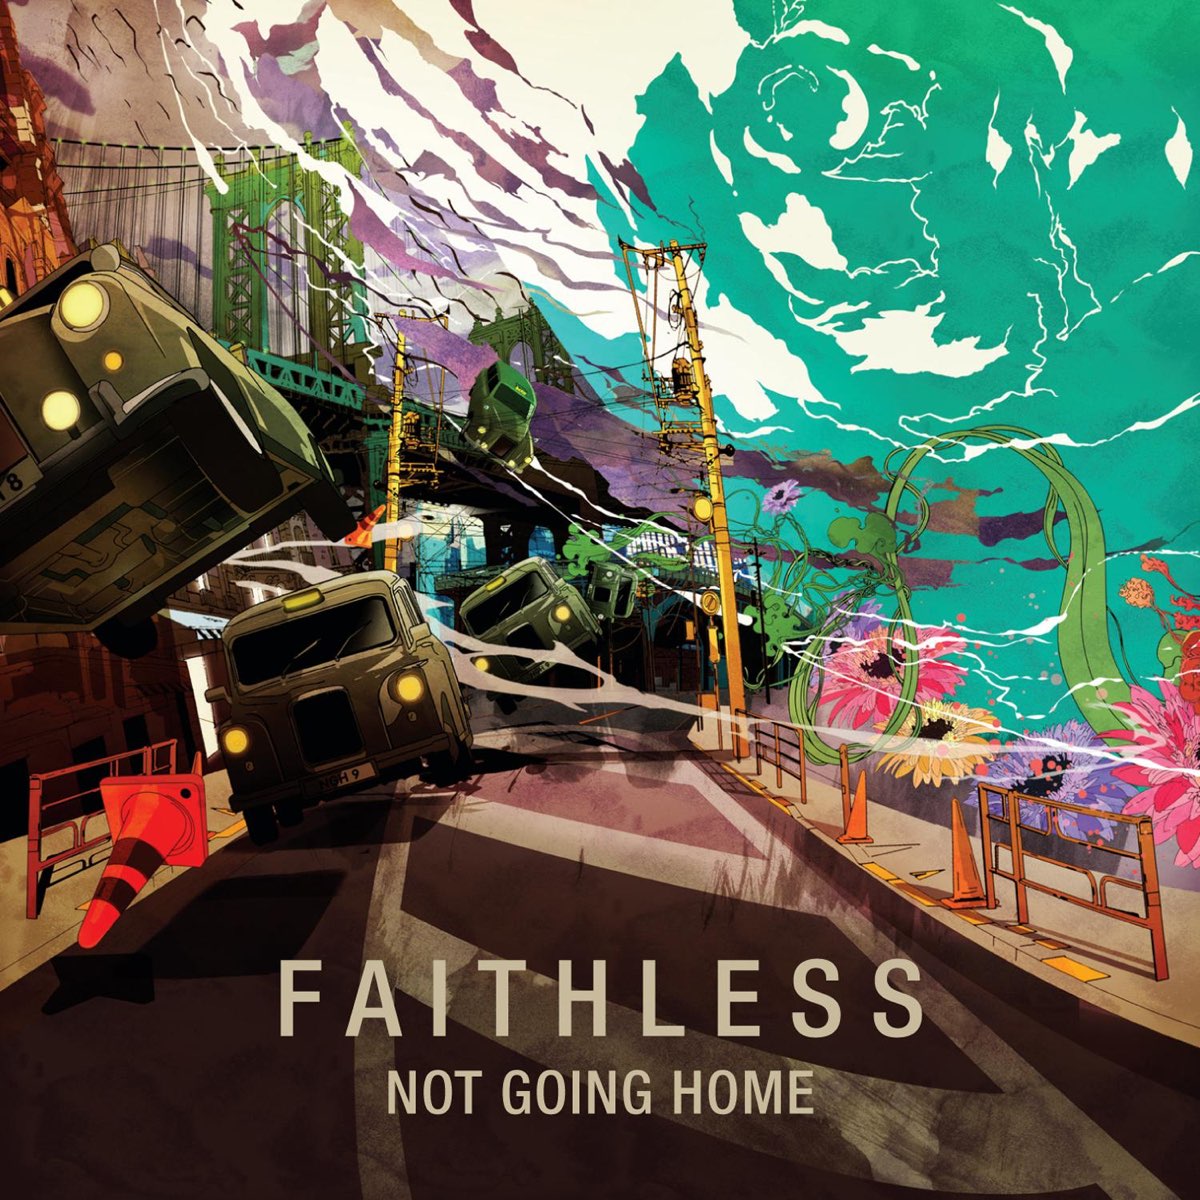 Going home music. Faithless not going Home. Going Home картины. Not going Home 2.0 Faithless Eric Prydz. Фотообои Faithless.